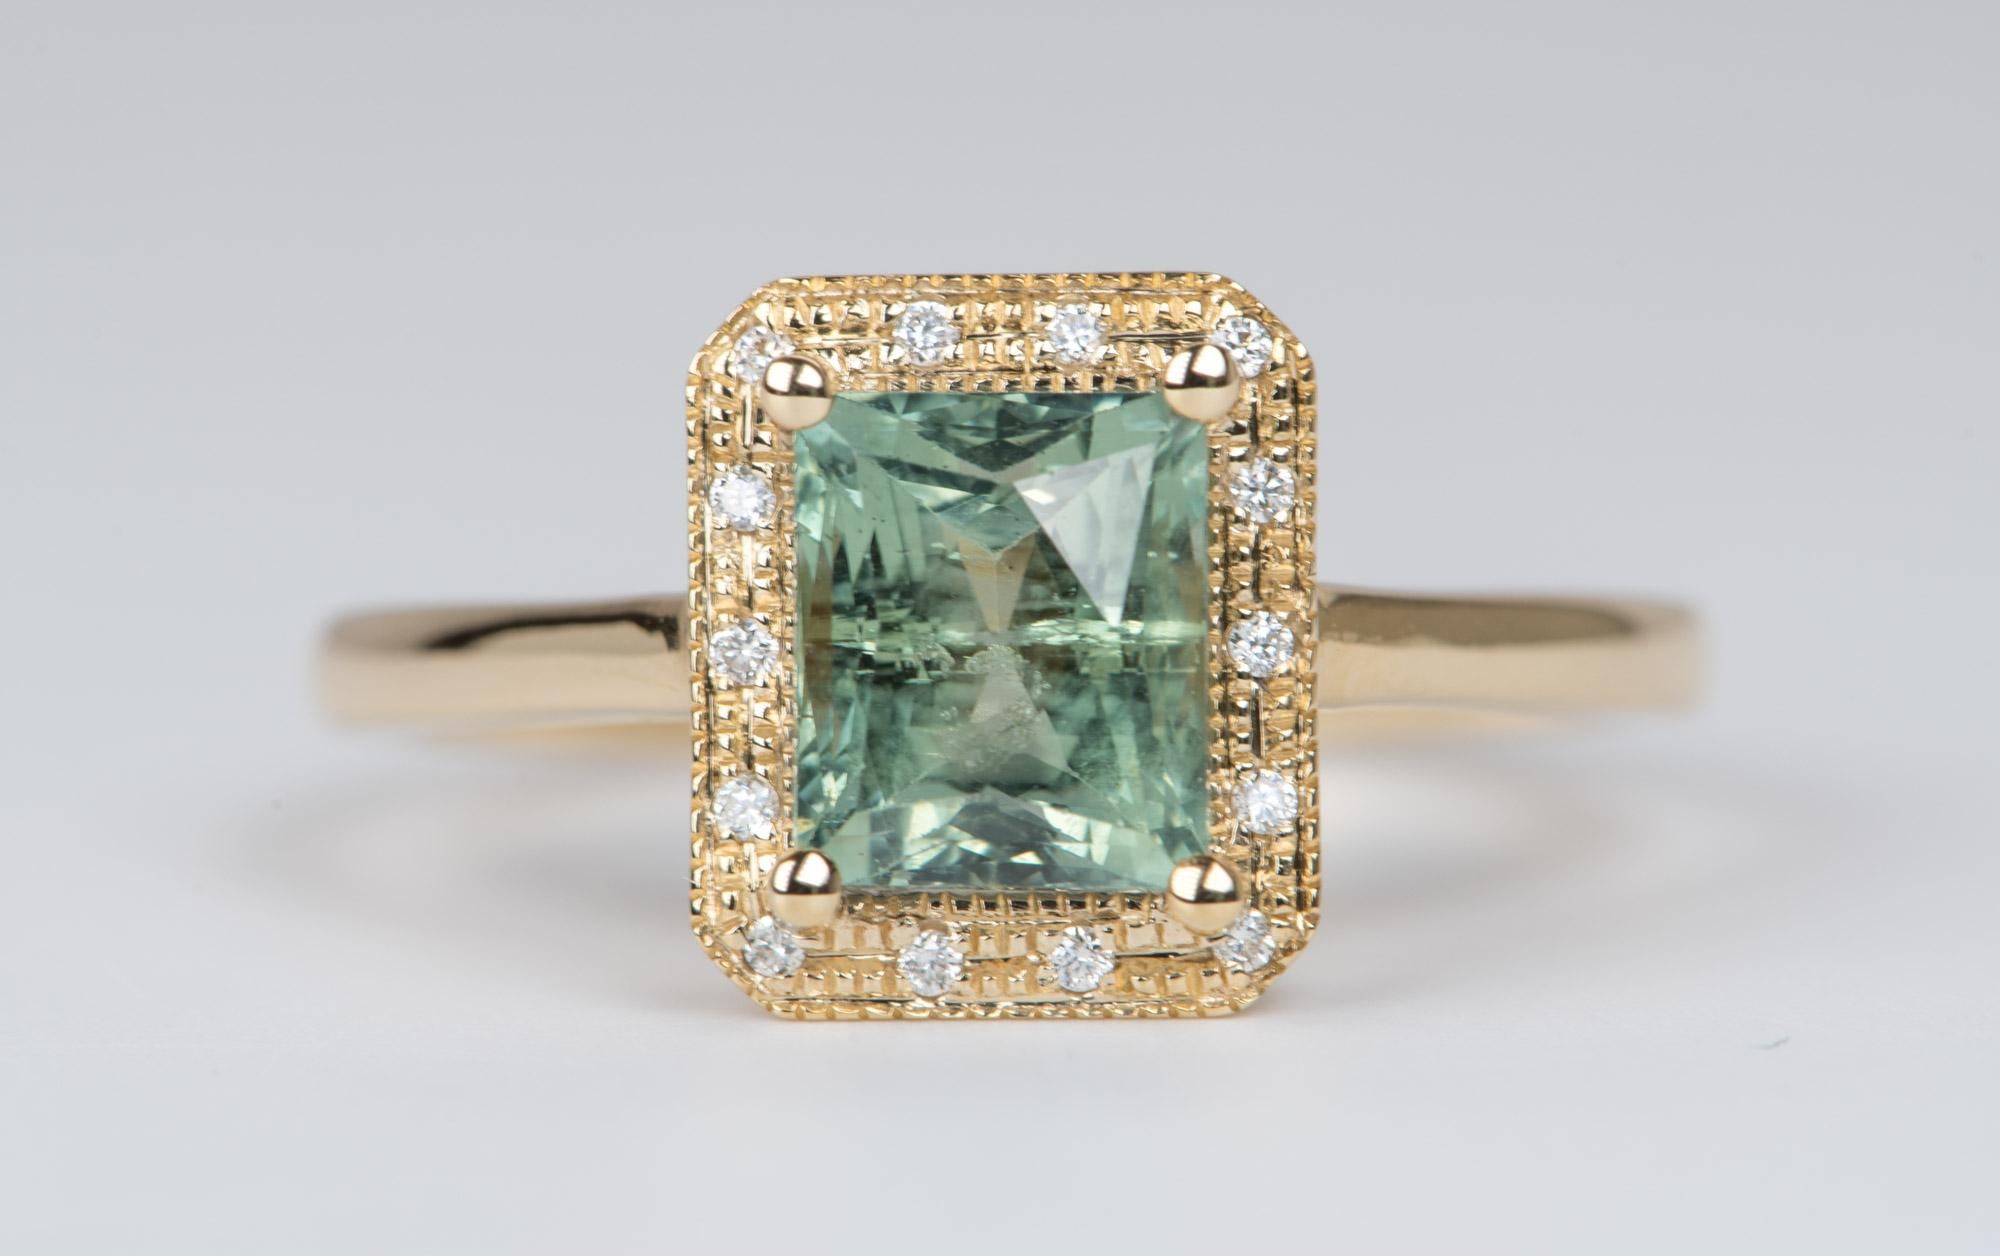 ♥  A solid 14k yellow gold ring set with a large rectangle-shaped Montana sapphire in the center, flanked by a textured diamond halo and delicate milgrain details
♥  The Montana sapphire has the typical silk found in Montana sapphires. 
♥  The